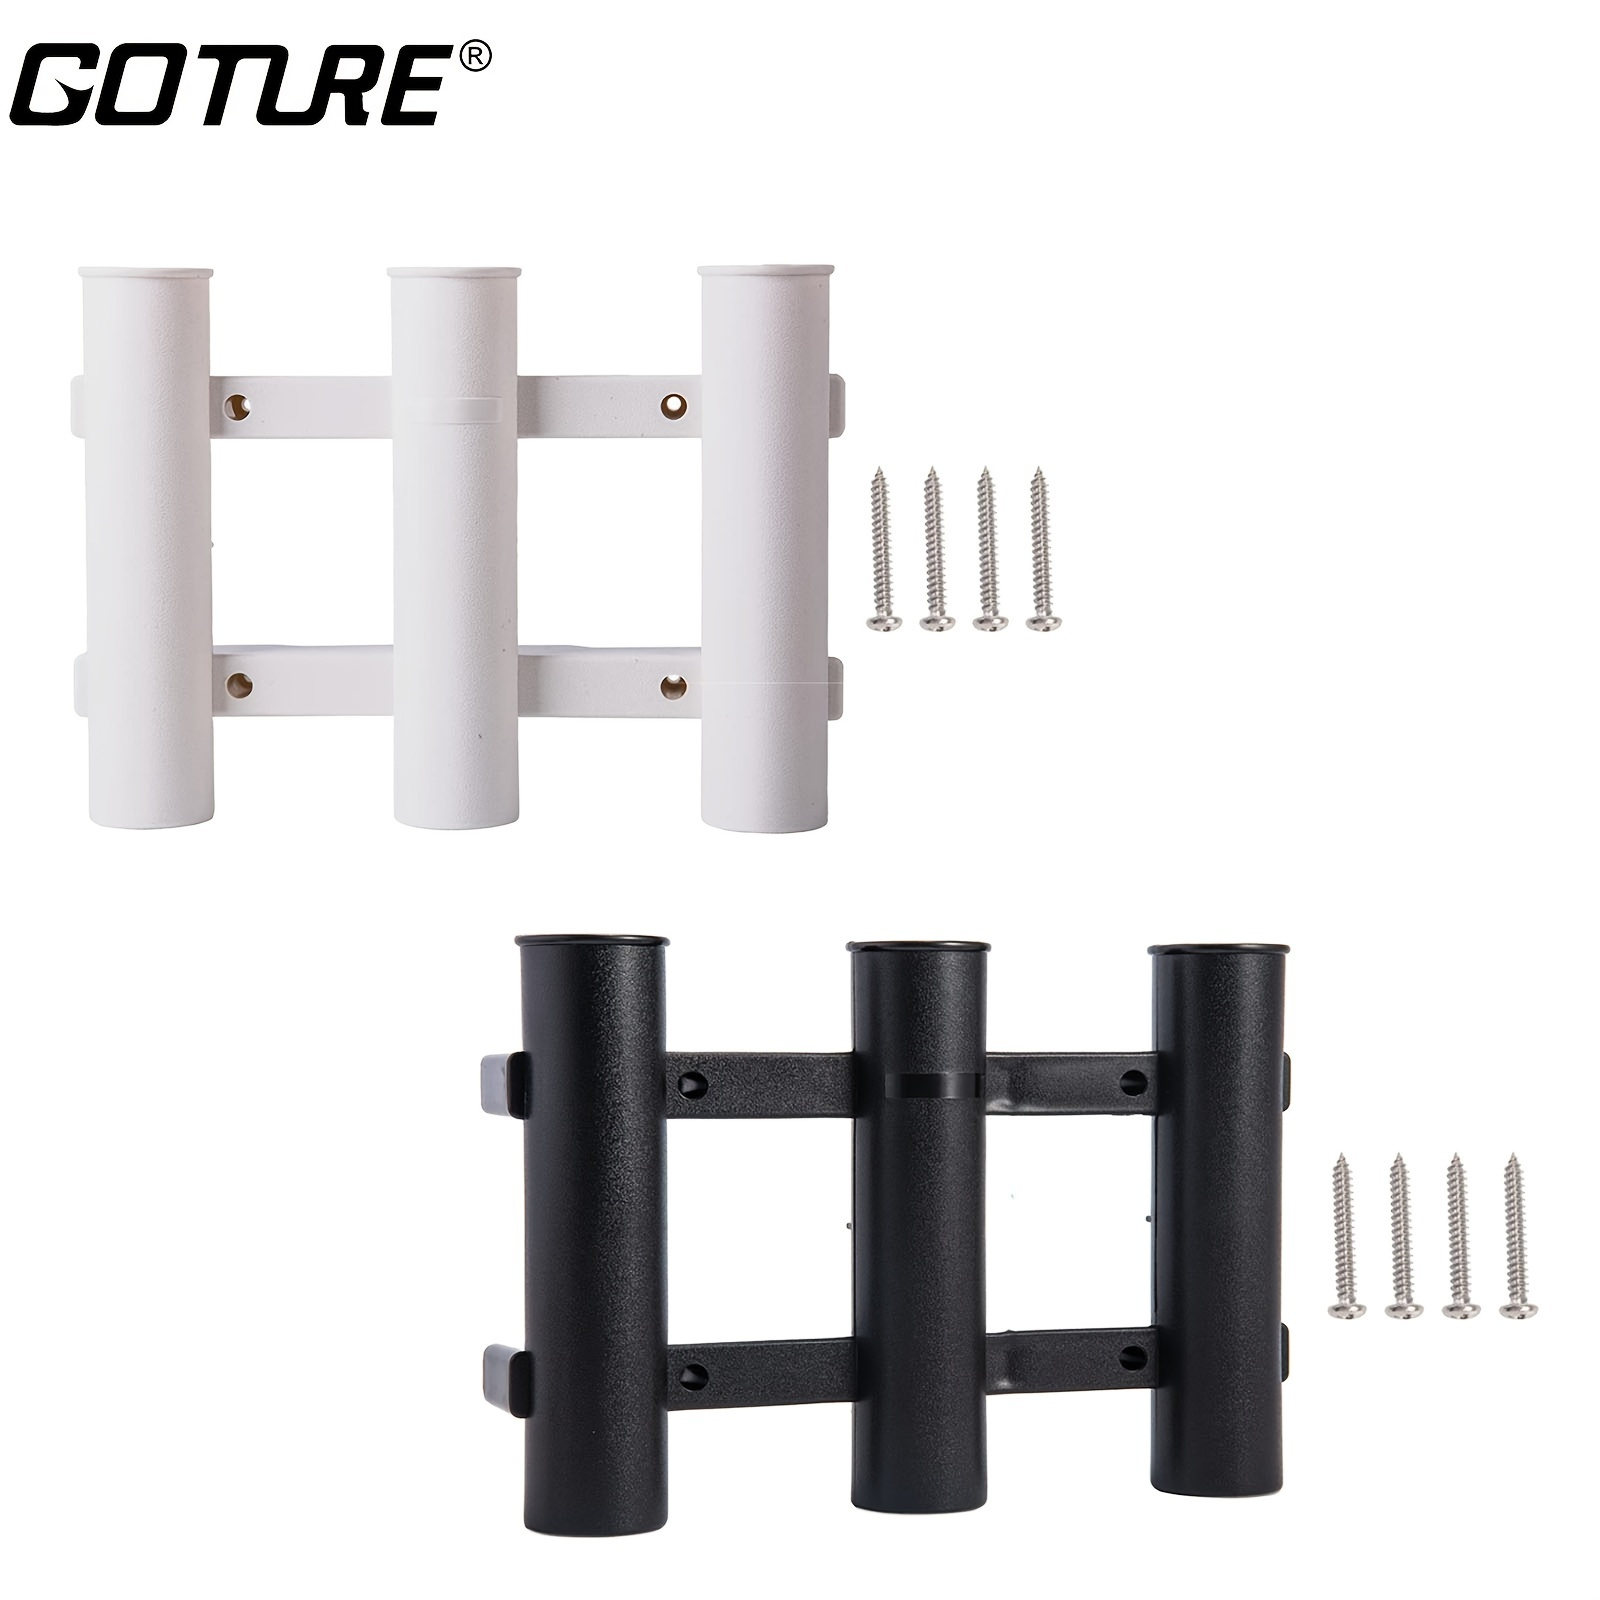 

Goture Boat Fishing Rod Holder - Durable 3 Rod Tube Plastic Holder For Convenient Fishing Tackle Storage